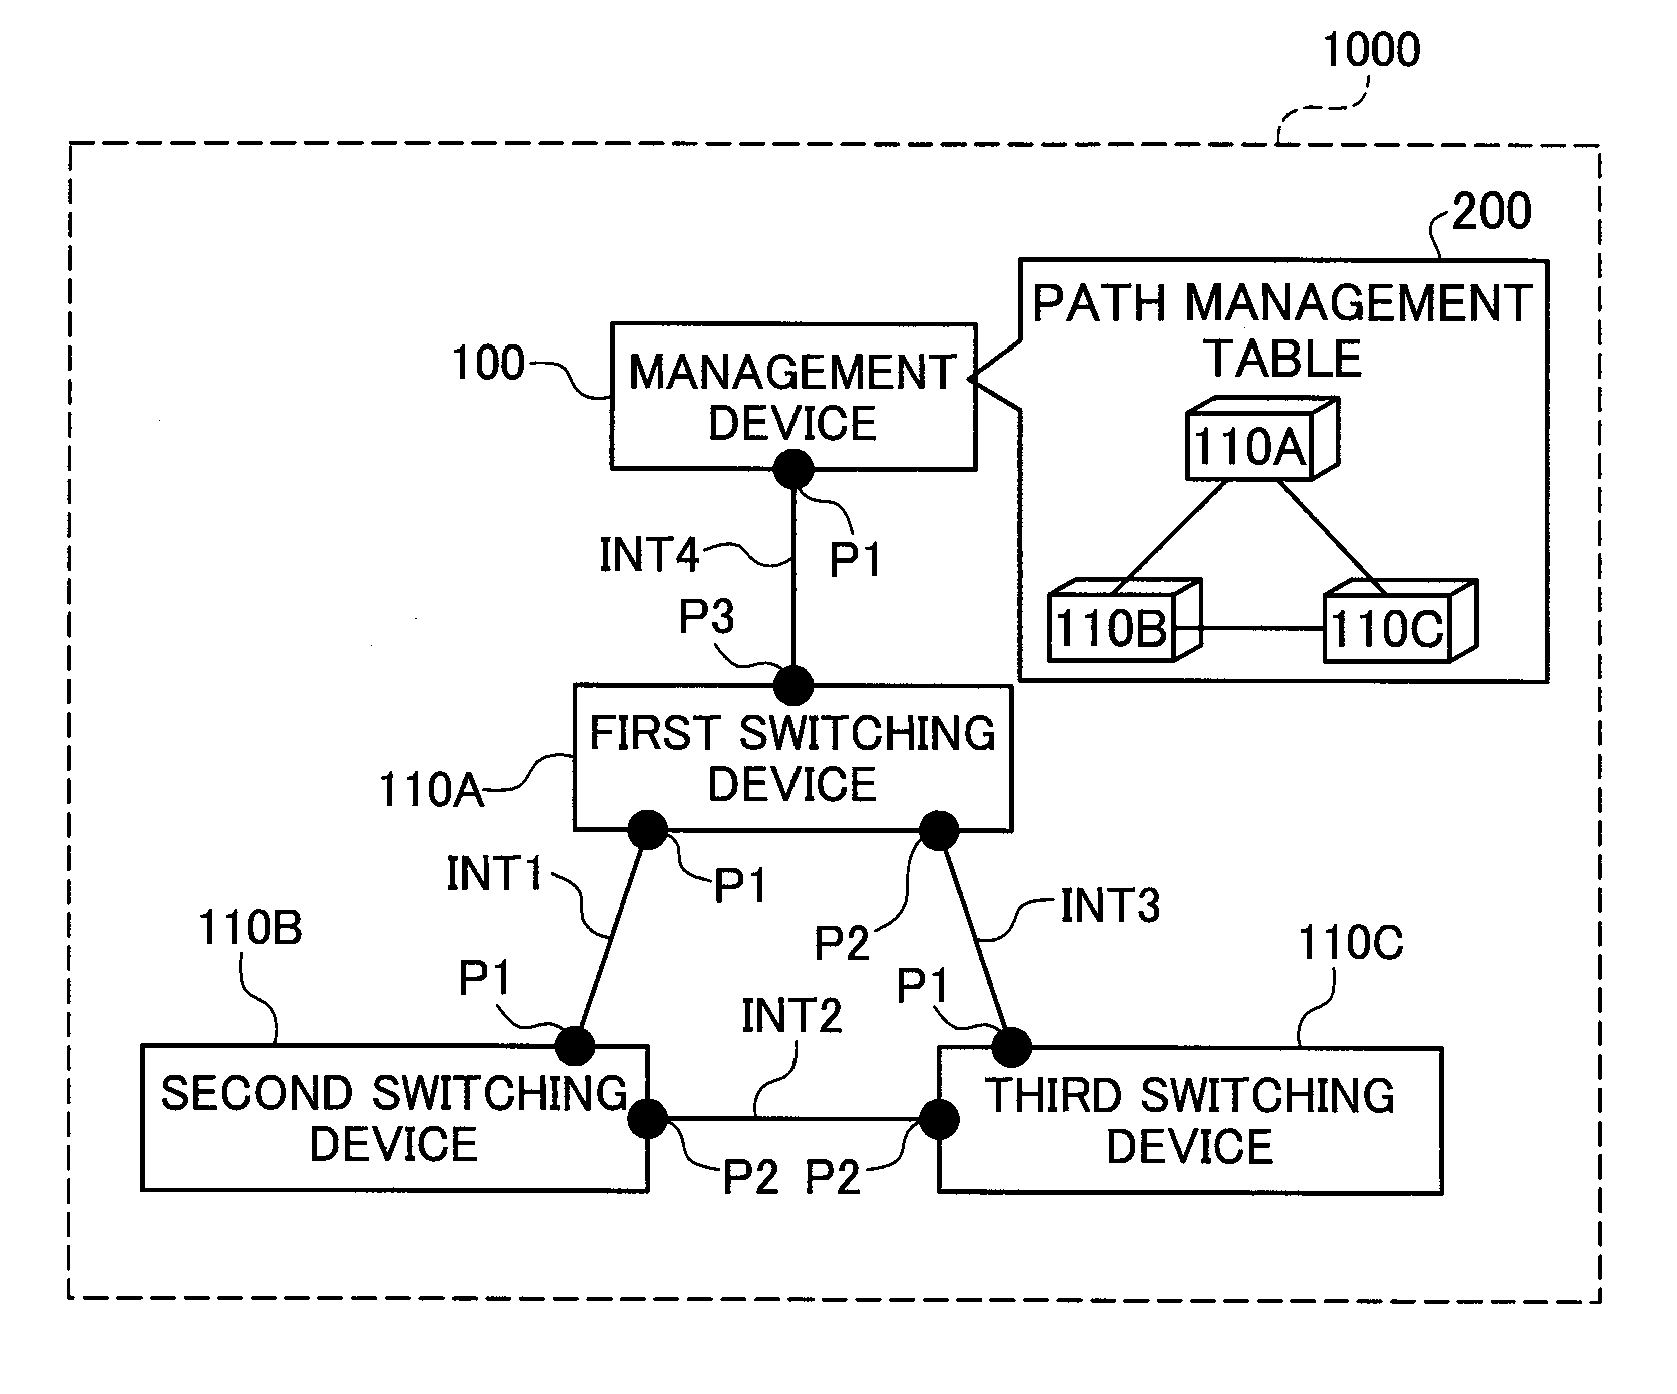 Network management apparatus and switching apparatus